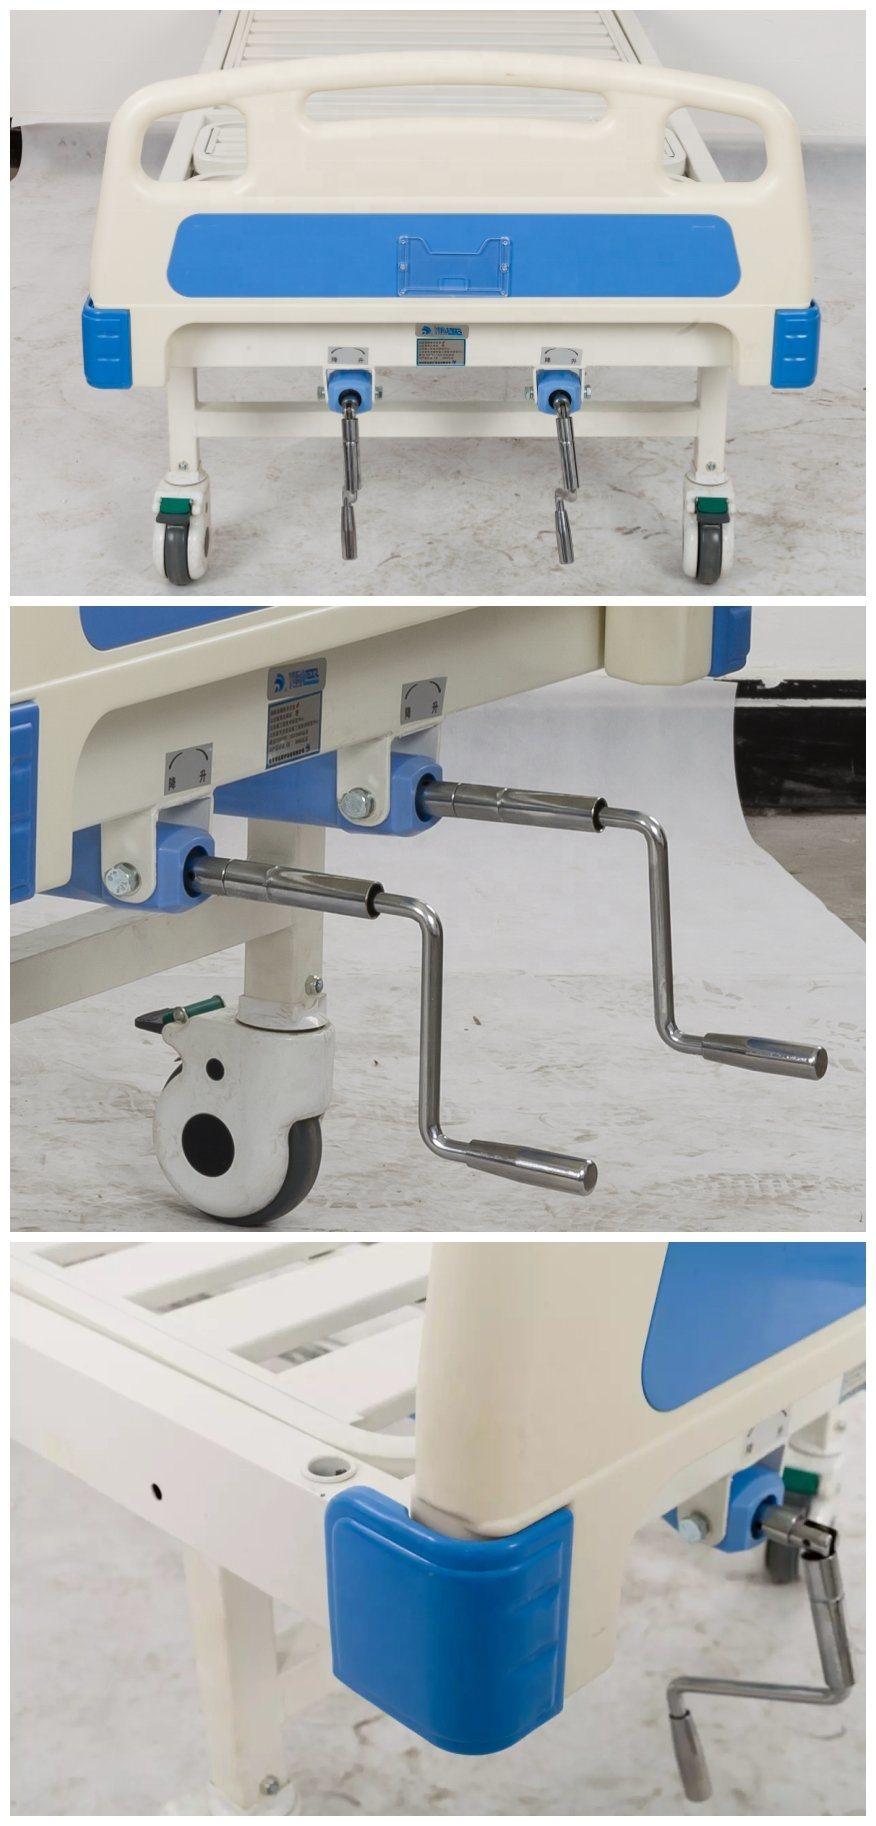 Silent Corrosion-Resistant Large Braking Force Stable and Safe Two Crank Hospital Manual Bed